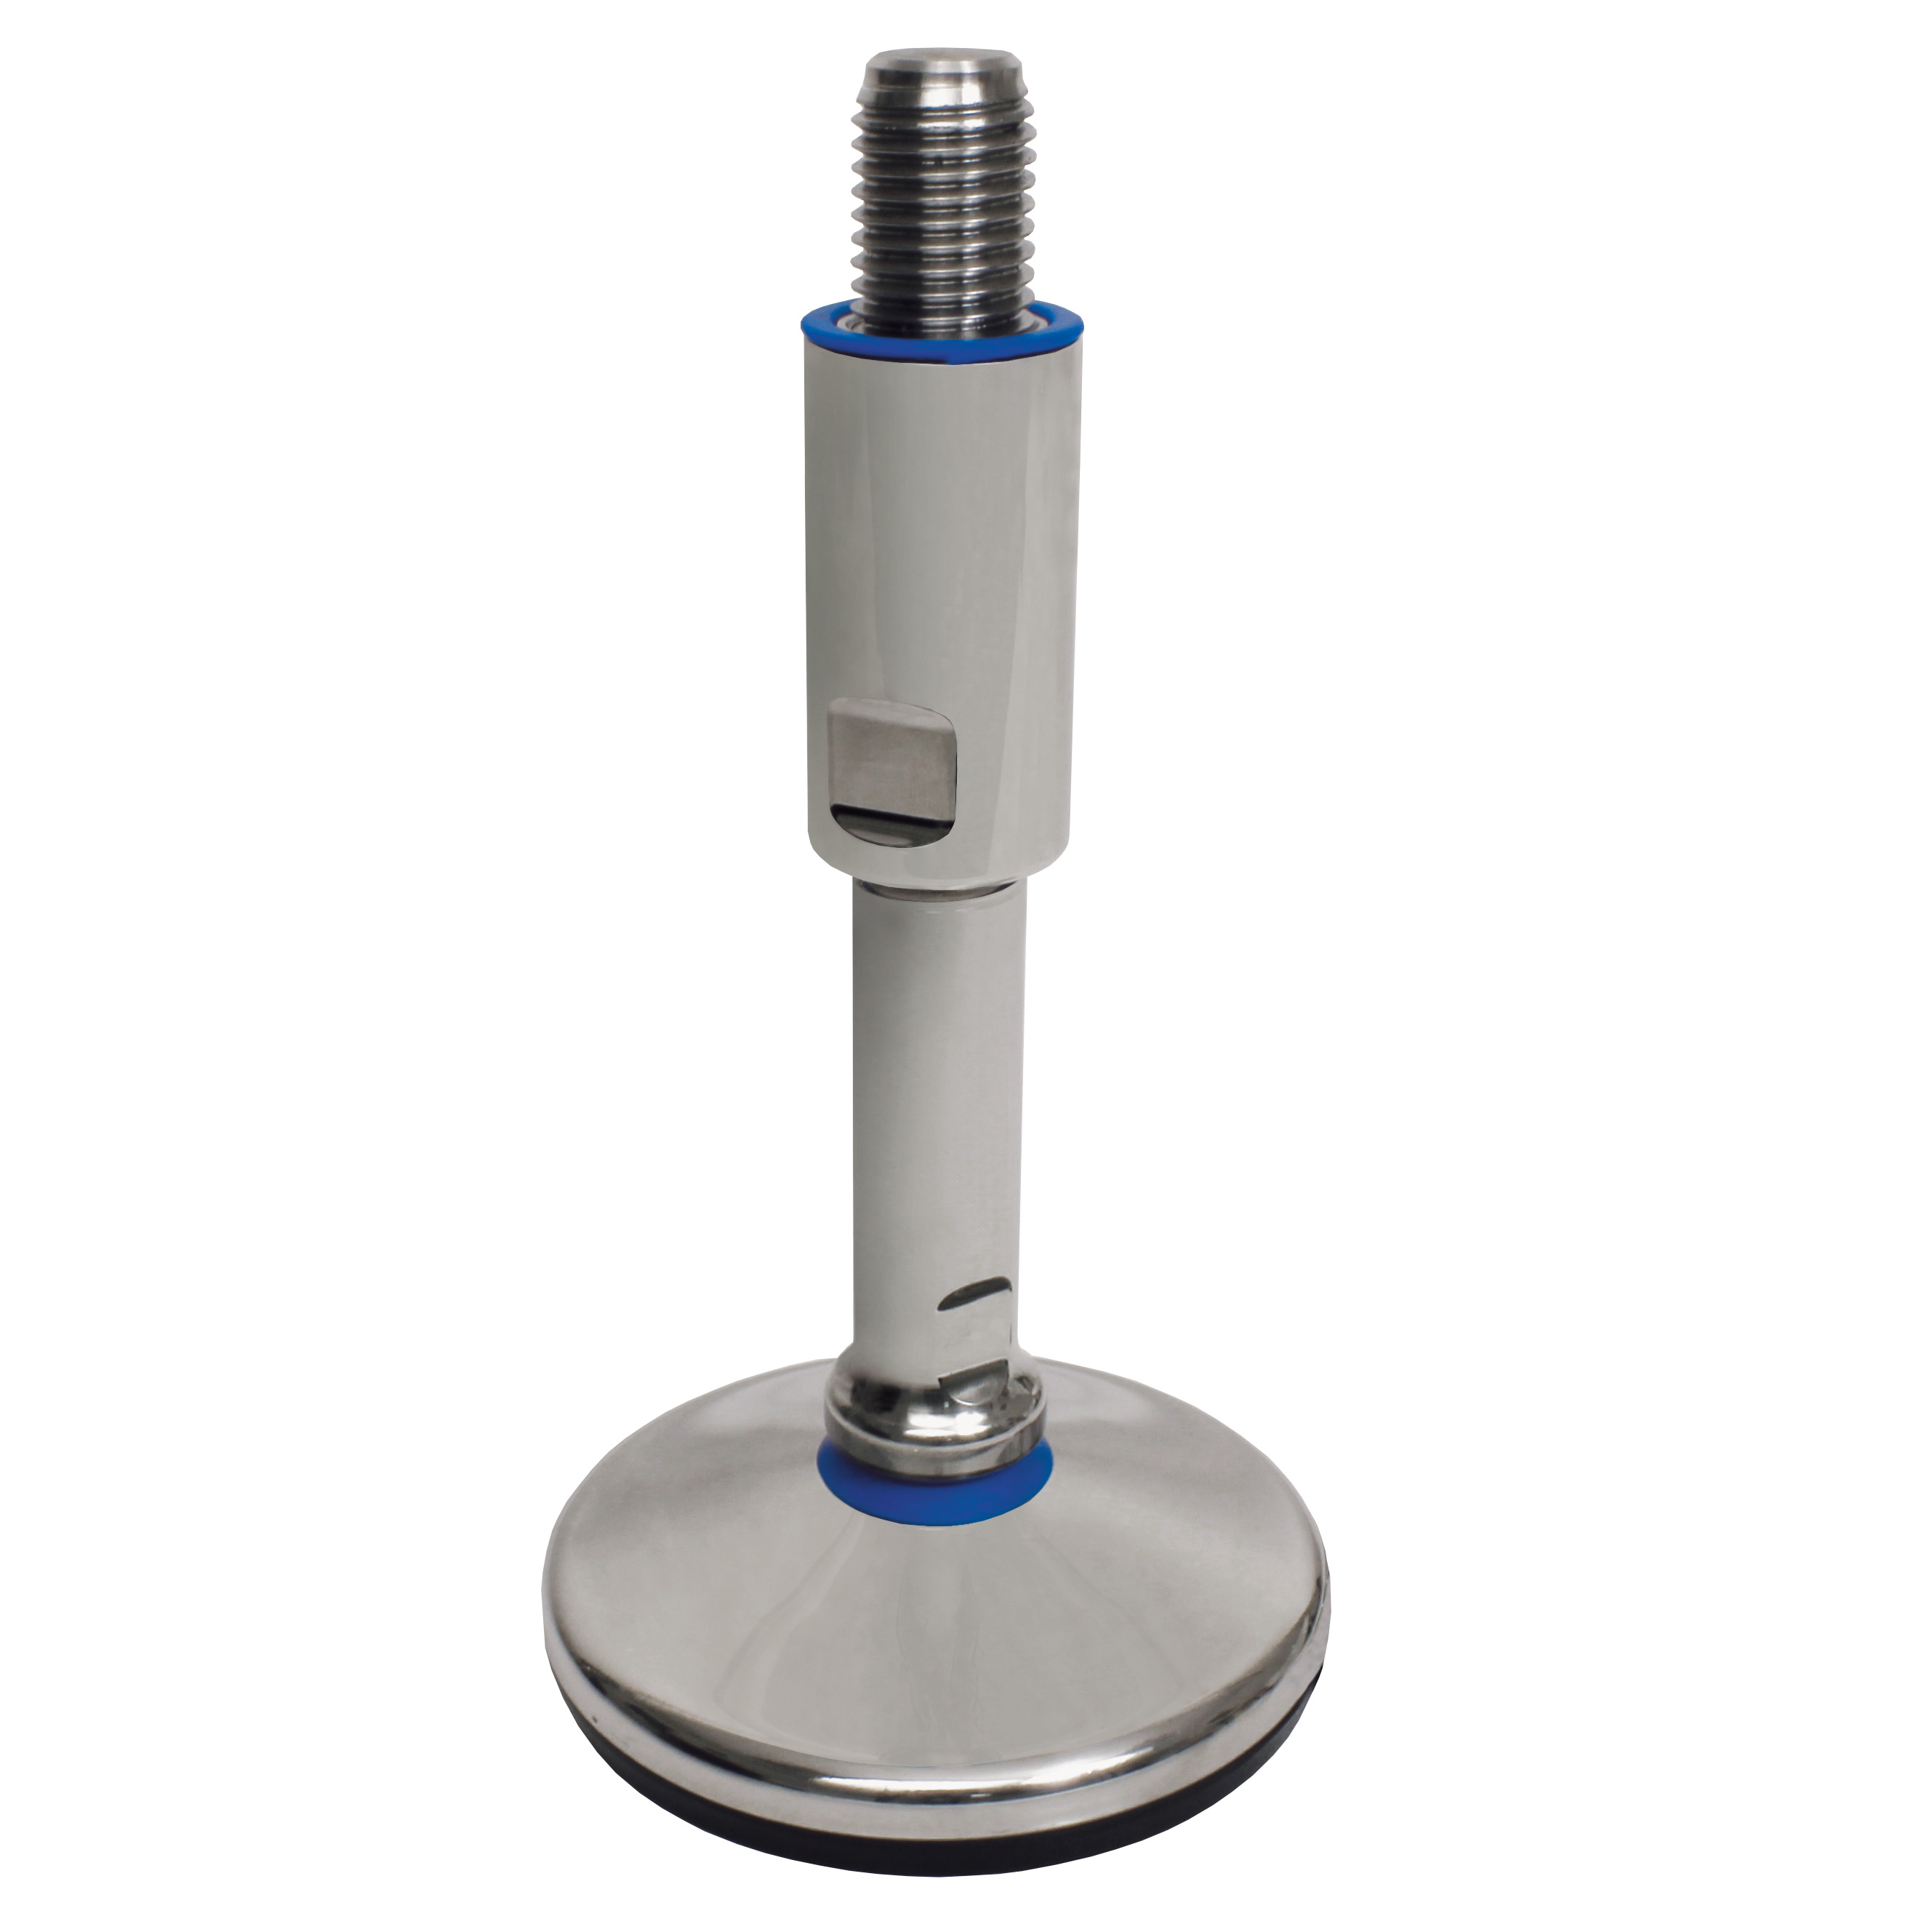 Foot for the food industry - Stainless steel - 3-A standard - 25,000N - 